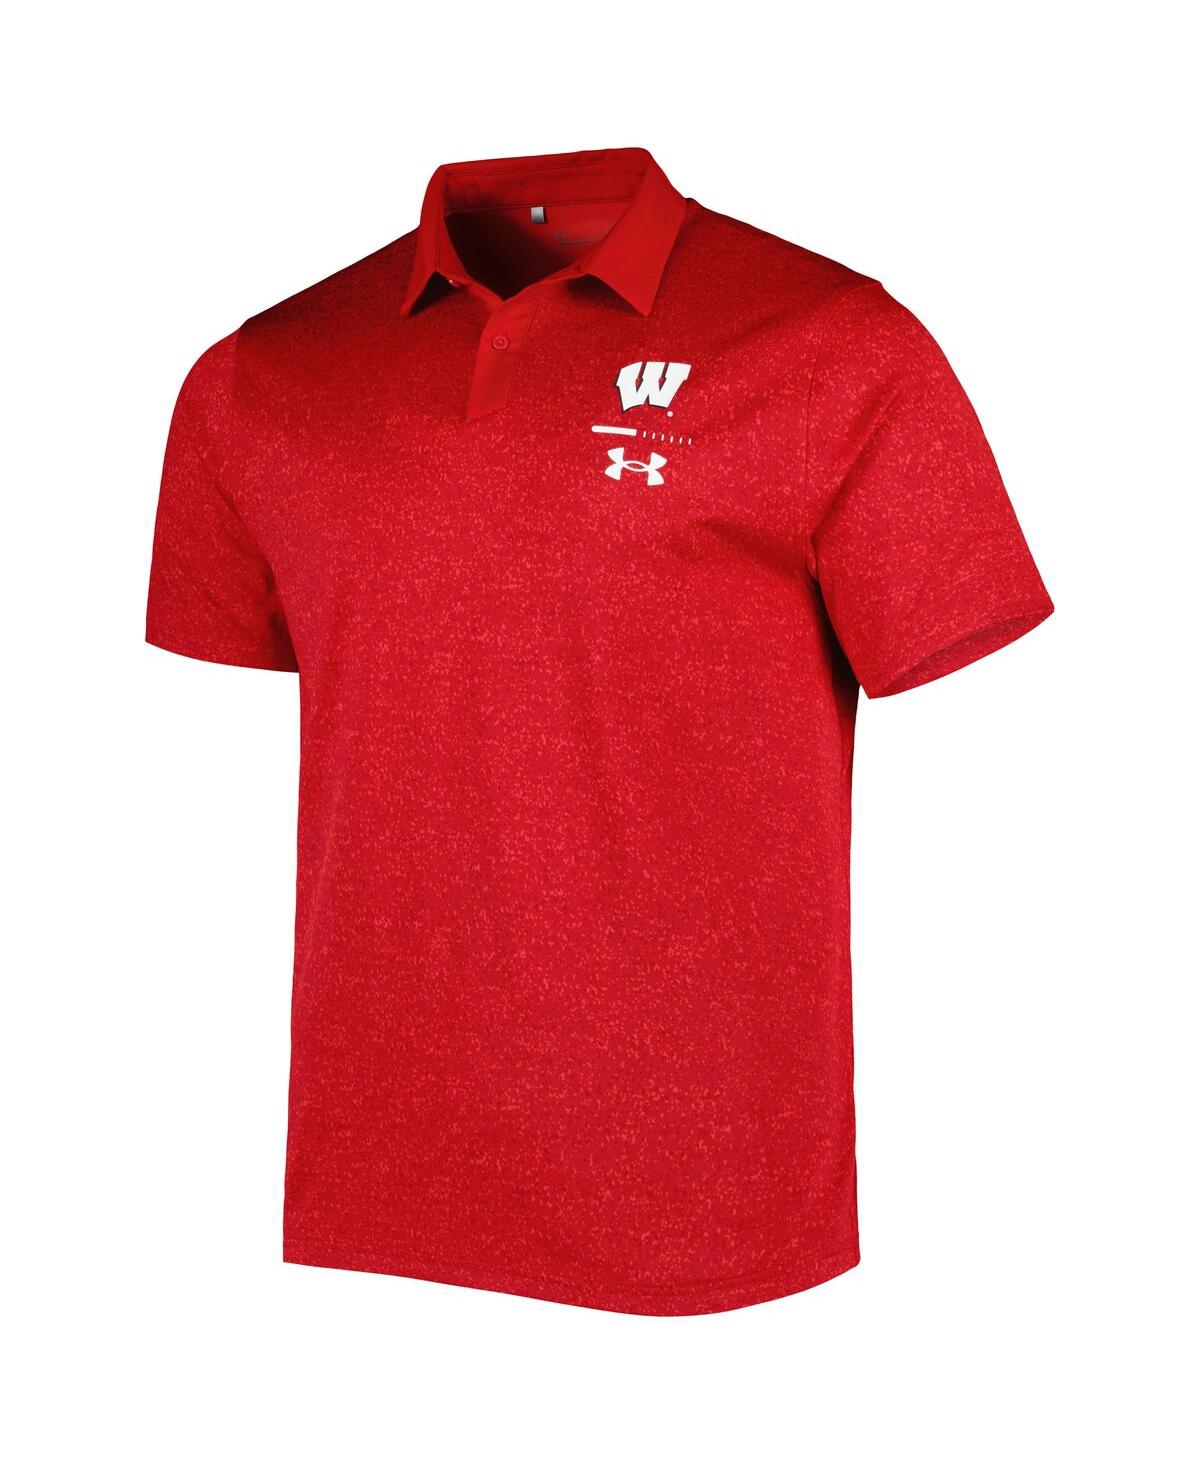 Shop Under Armour Men's  Red Wisconsin Badgers Static Performance Polo Shirt